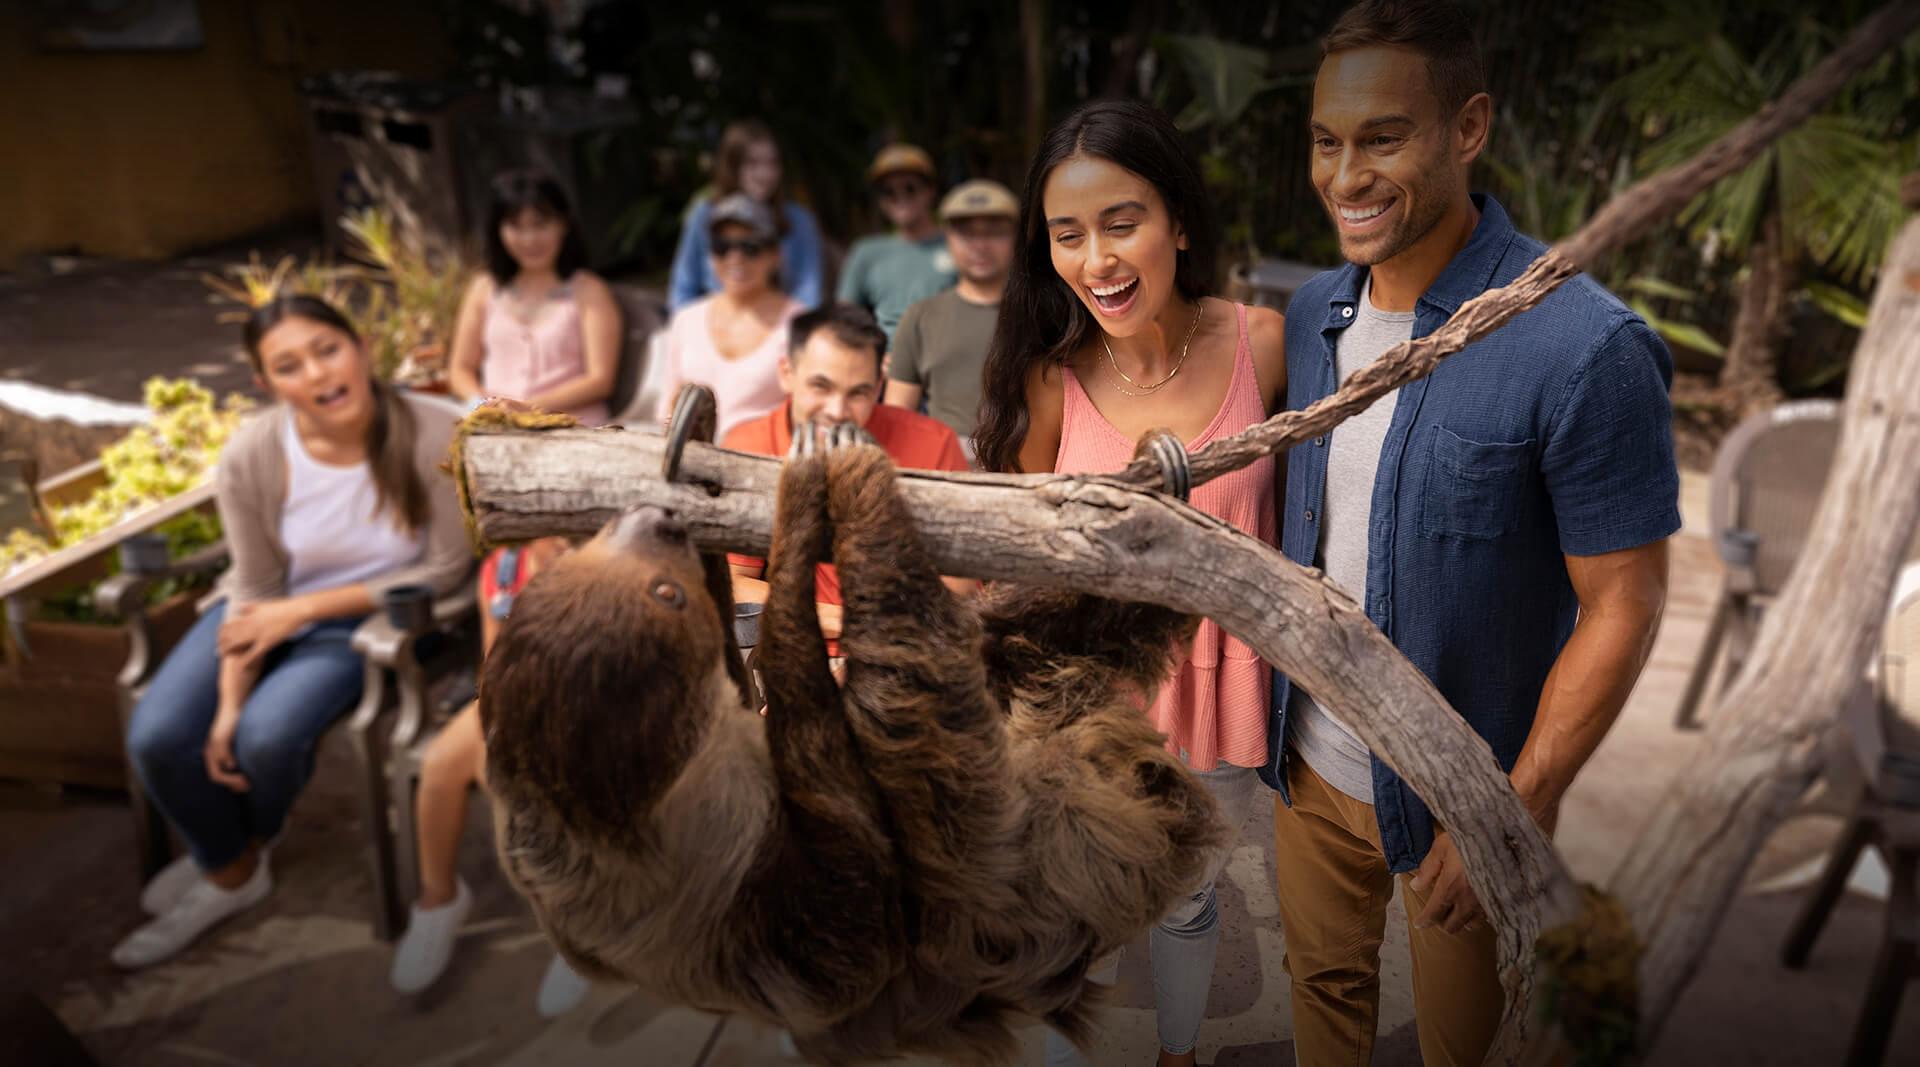 Couple looking at a sloth